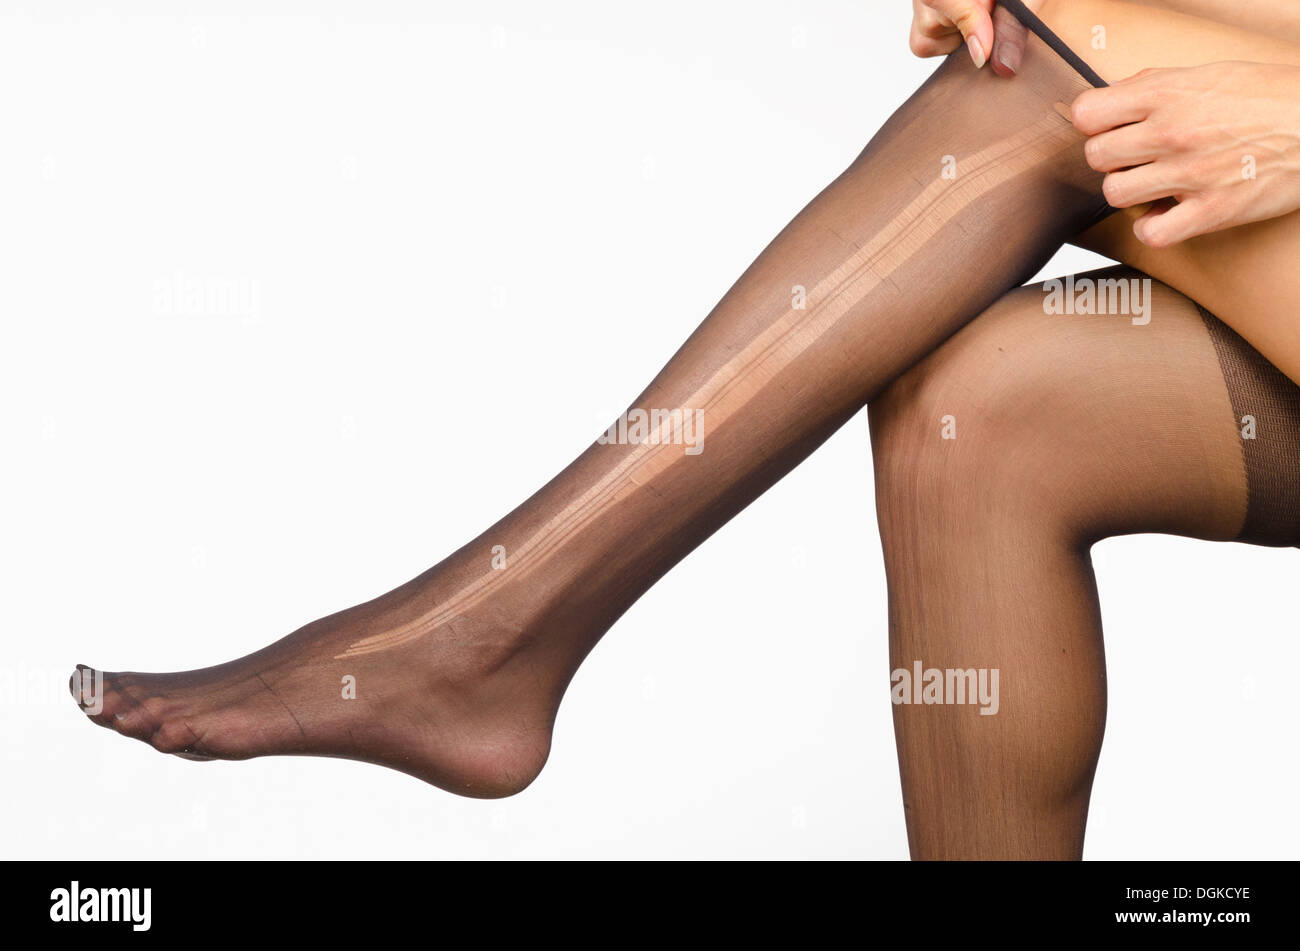 Female legs with a ripped pantyhose on Stock Photo - Alamy